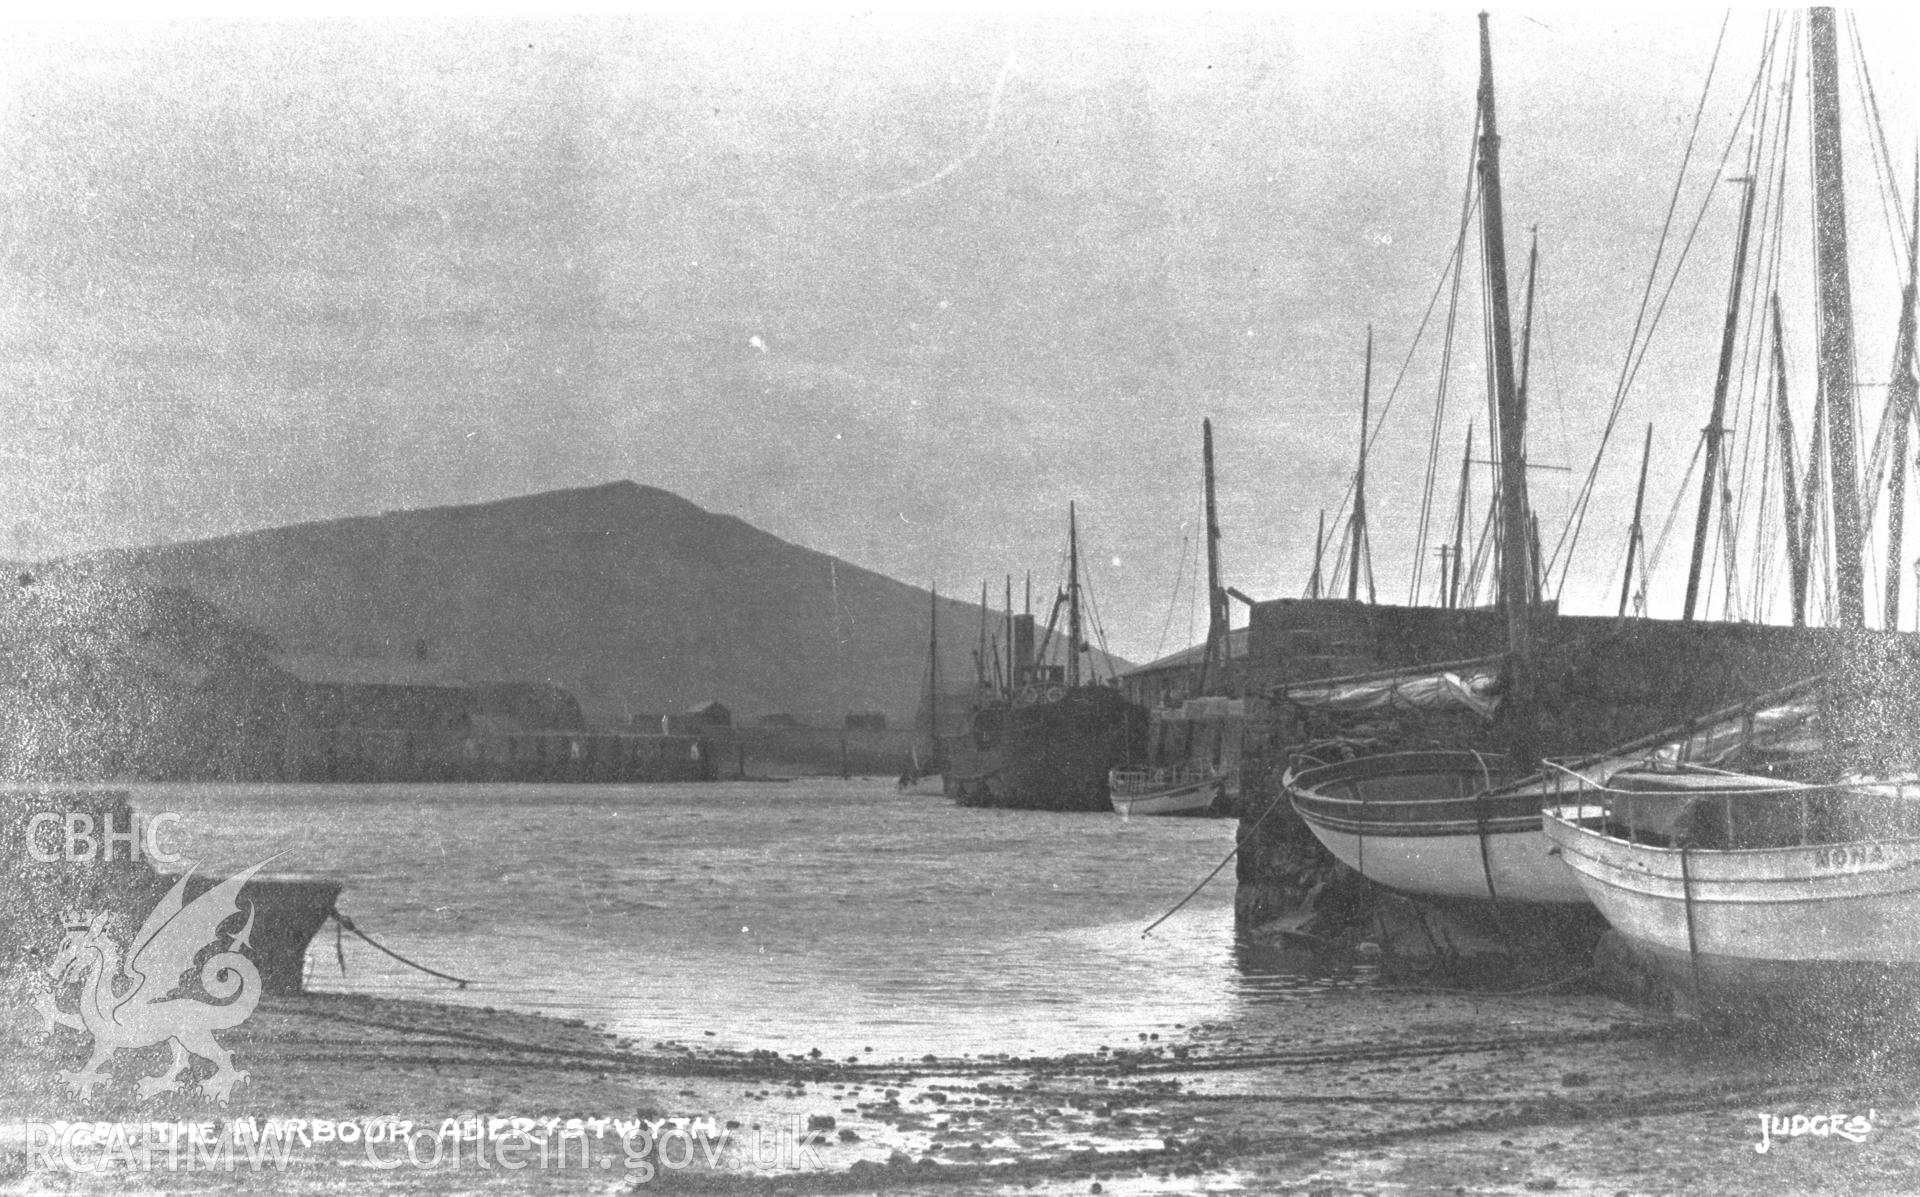 Digital copy of a Judges Postcard view of the harbour at Aberystwyth.